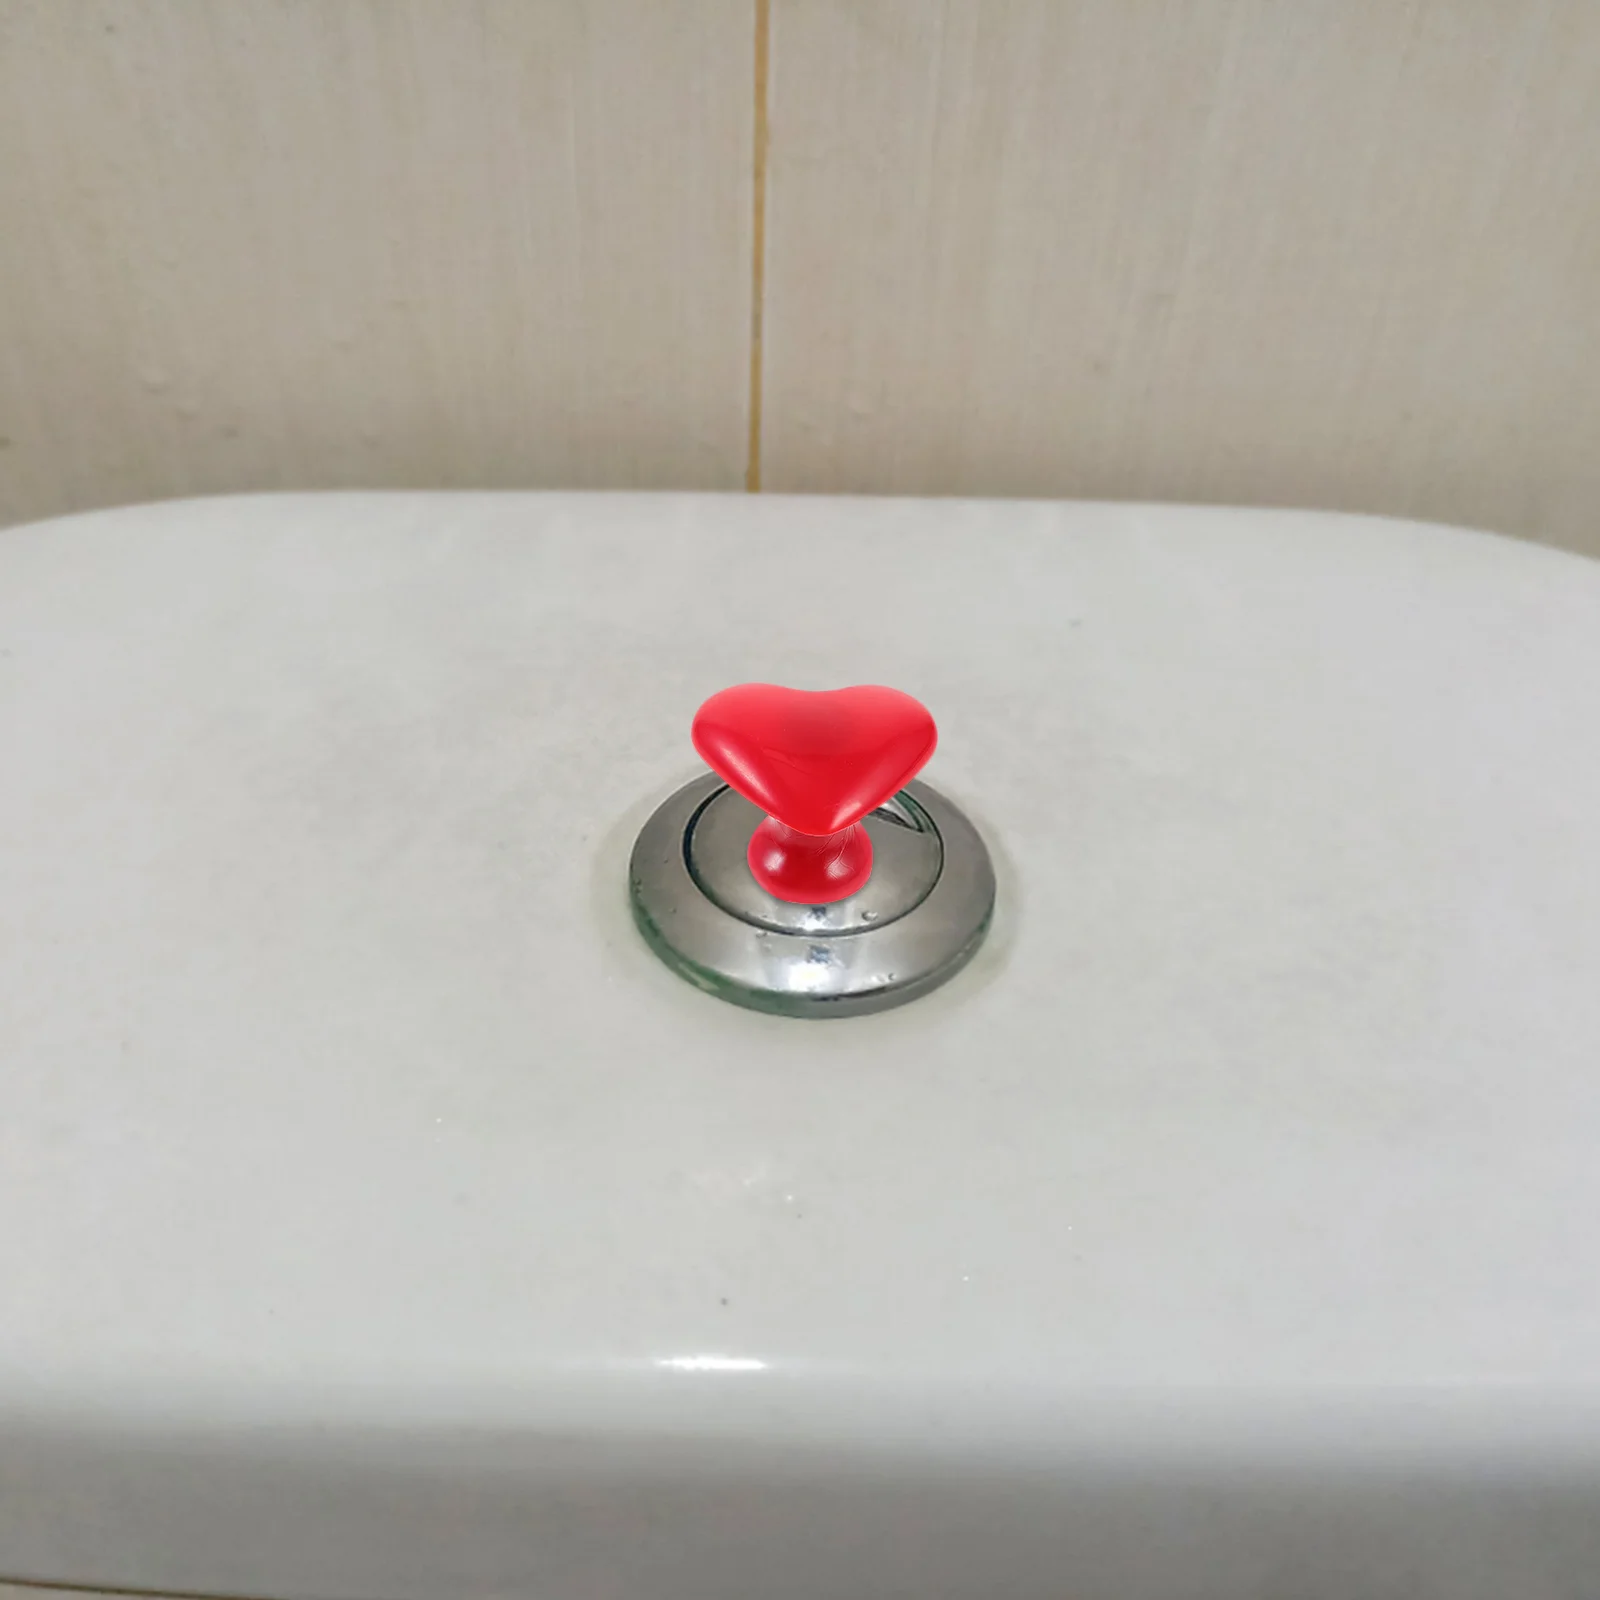 

10 Pcs Toilet Flush Button Decorative Helper Assistant Tool Home Fittings Drawer Bathroom Push Tank Abs Tops Heart Parts